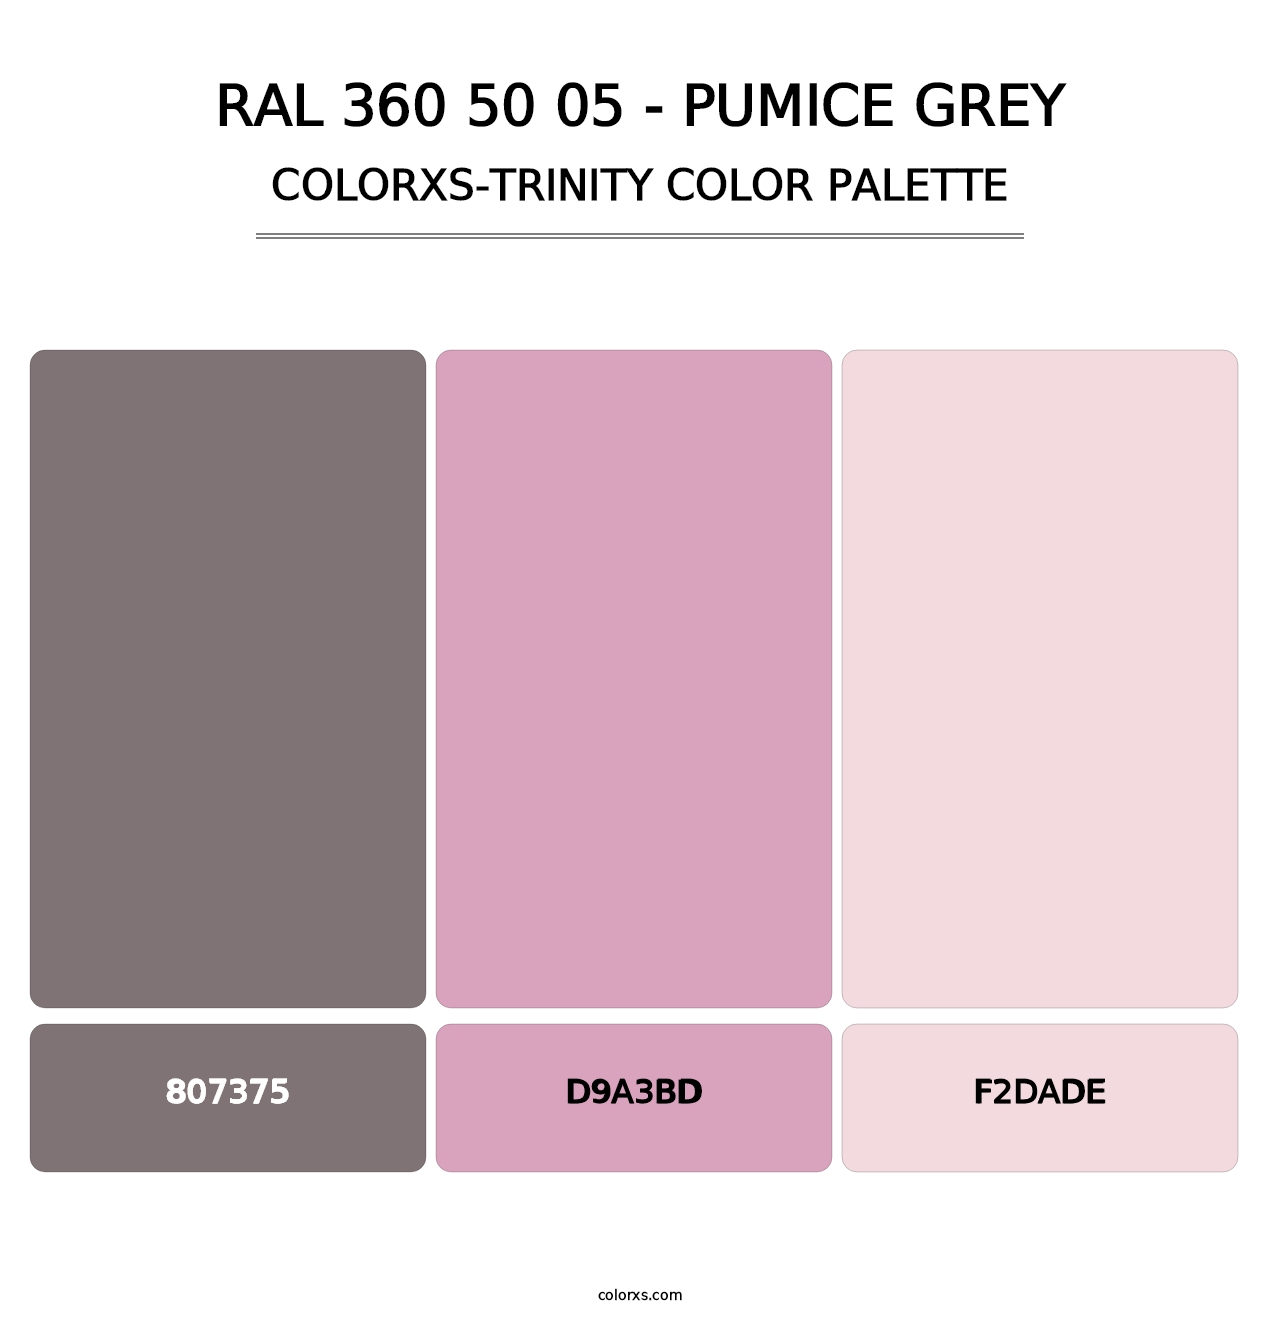 RAL 360 50 05 - Pumice Grey - Colorxs Trinity Palette